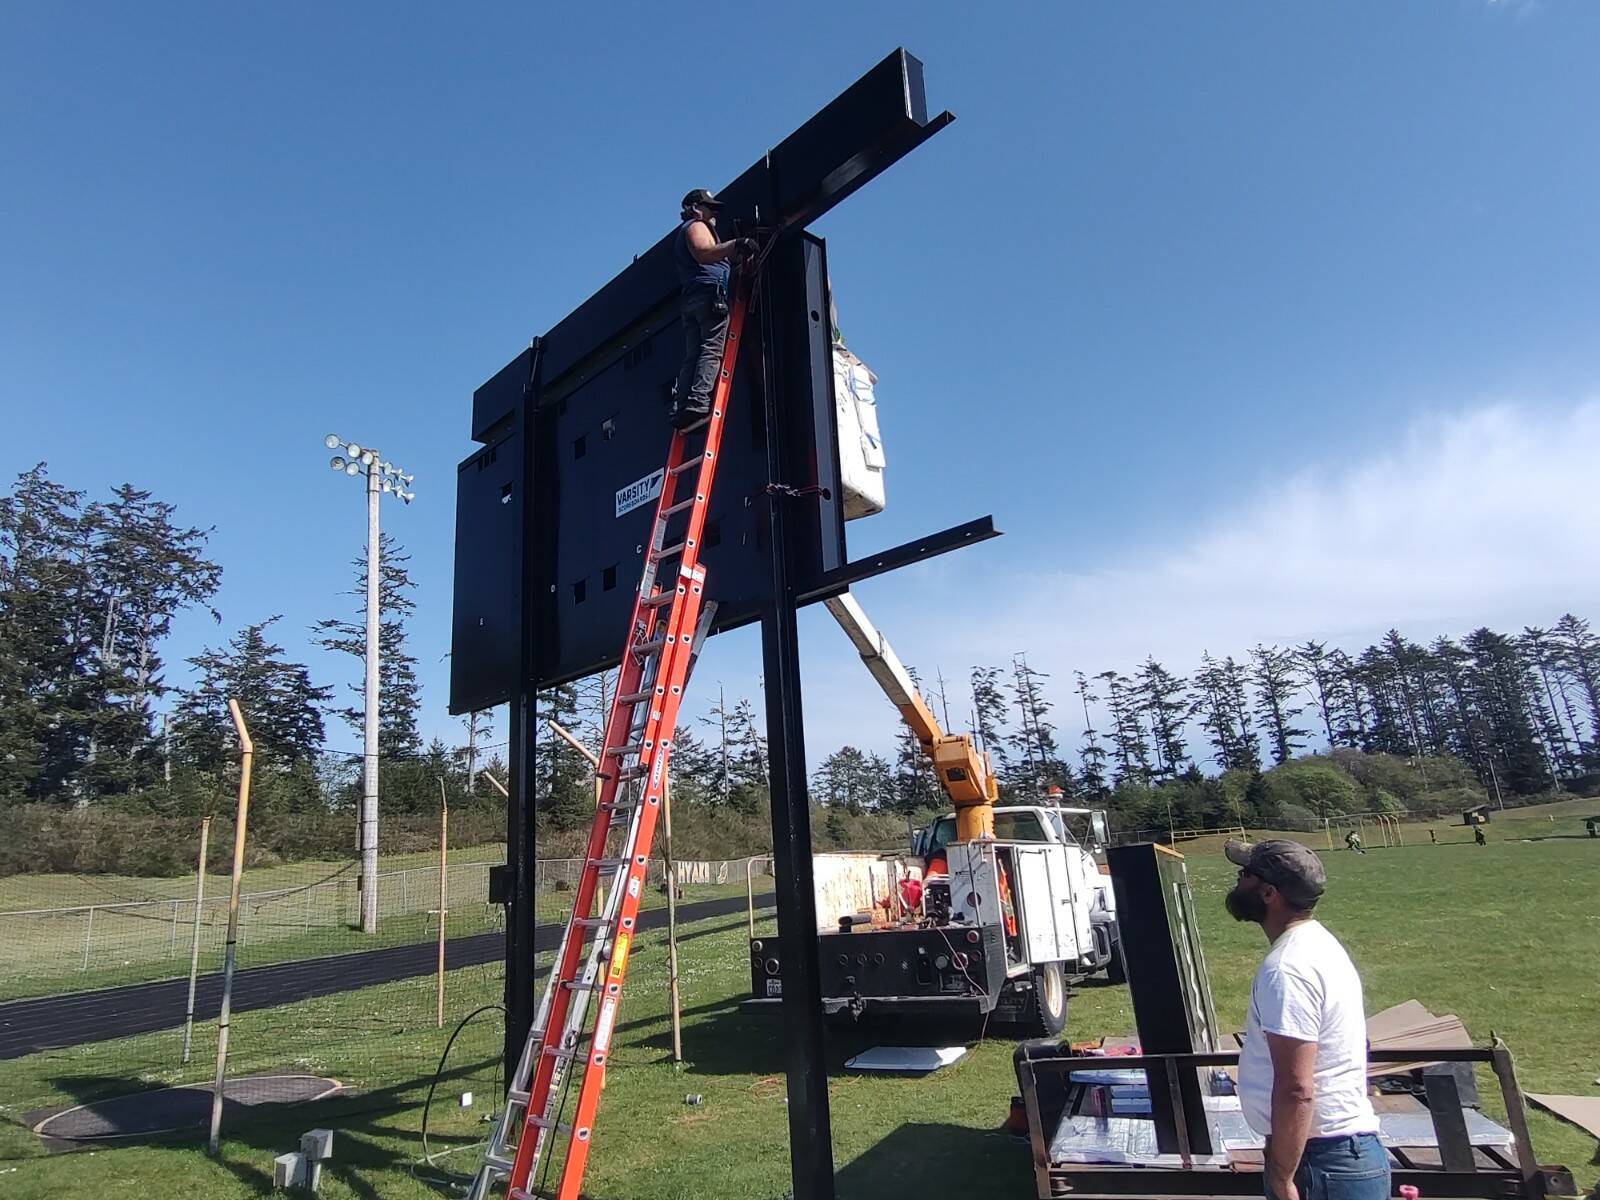 Courtesy of Frank Elduen
The new North Beach scoreboard was installed by Coastline Sign and wired by Buck Electric.